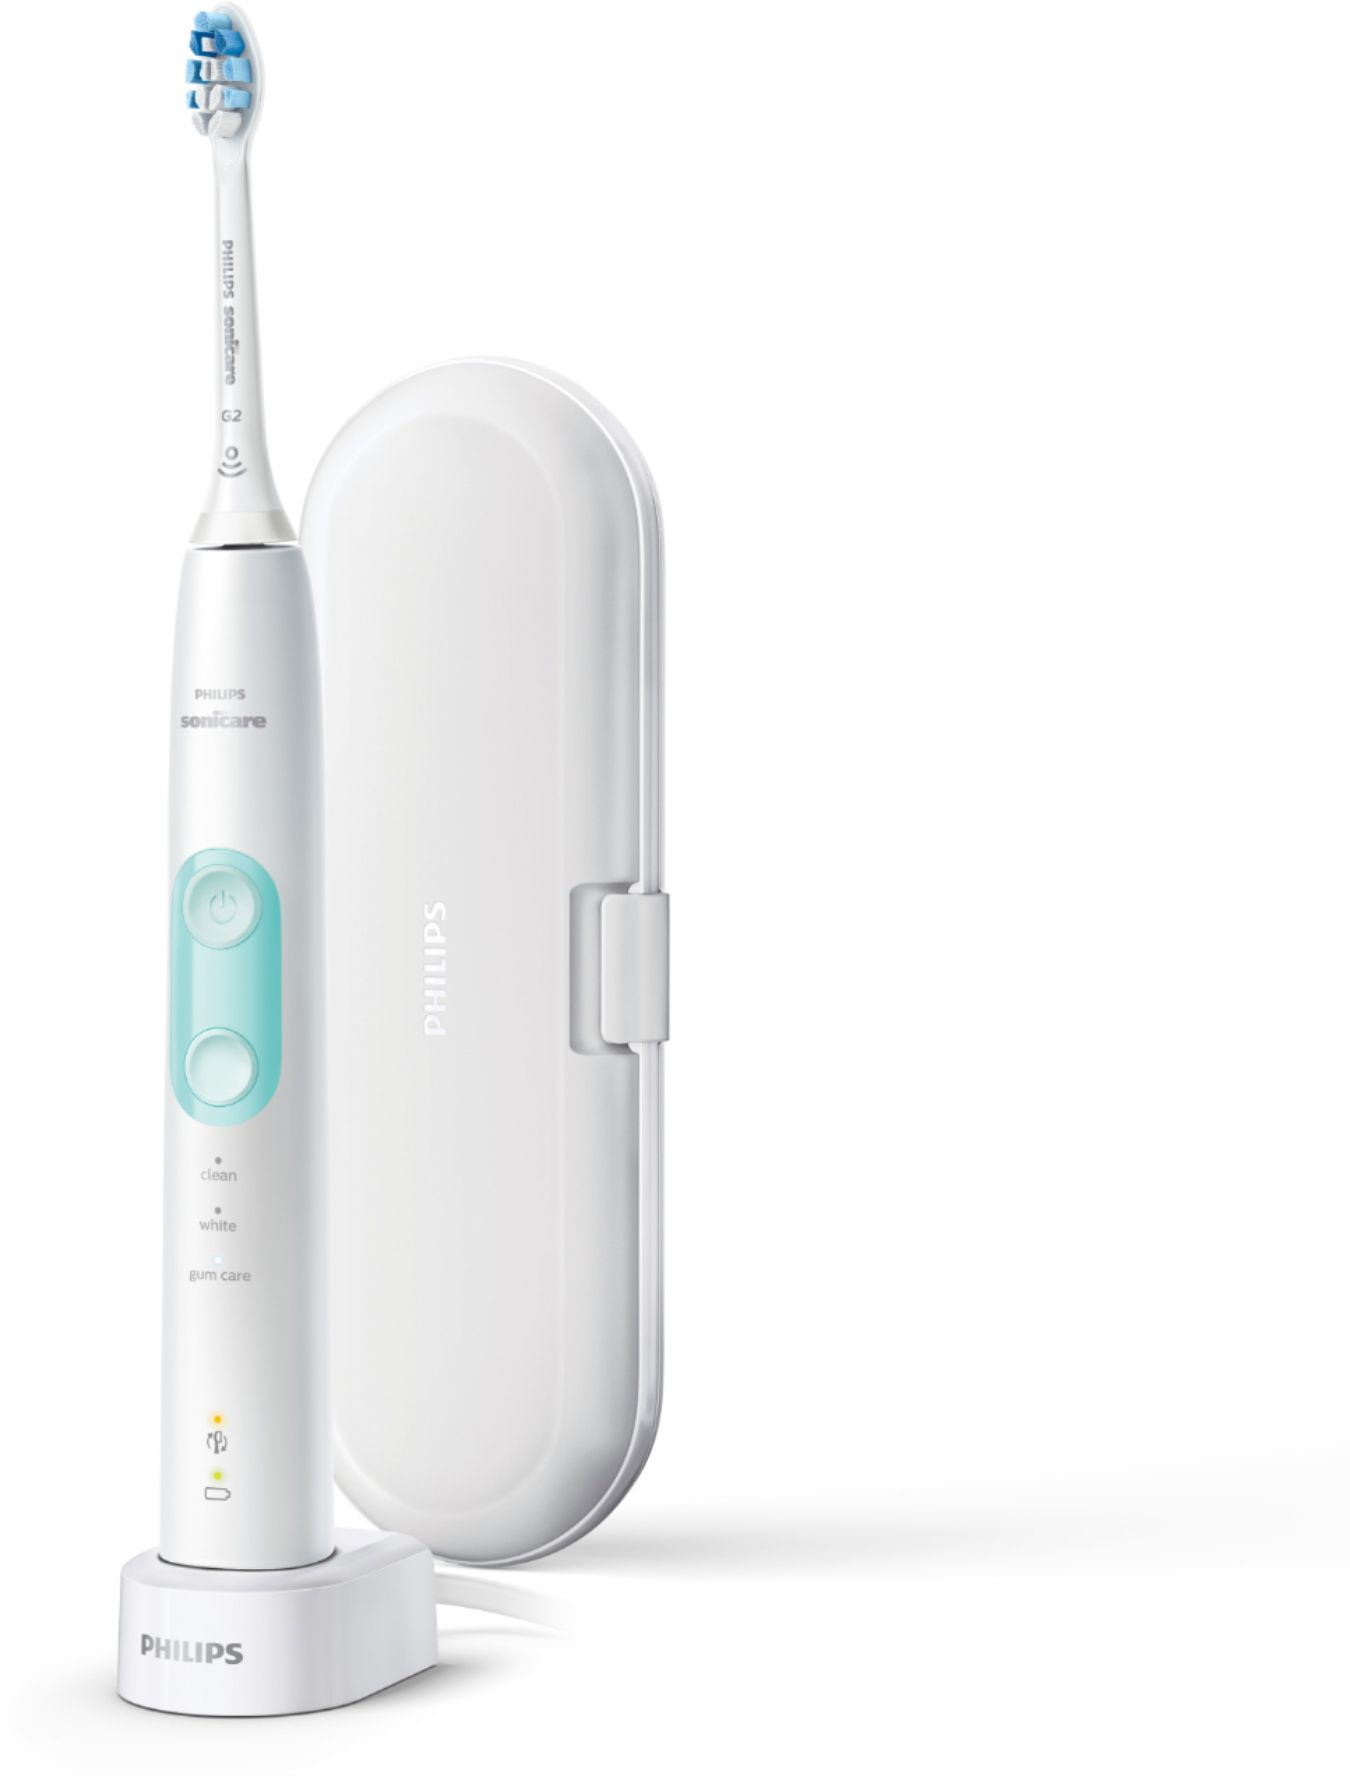 Philips Sonicare ProtectiveClean 5100 Rechargeable Toothbrush (White) $46 + Free Shipping